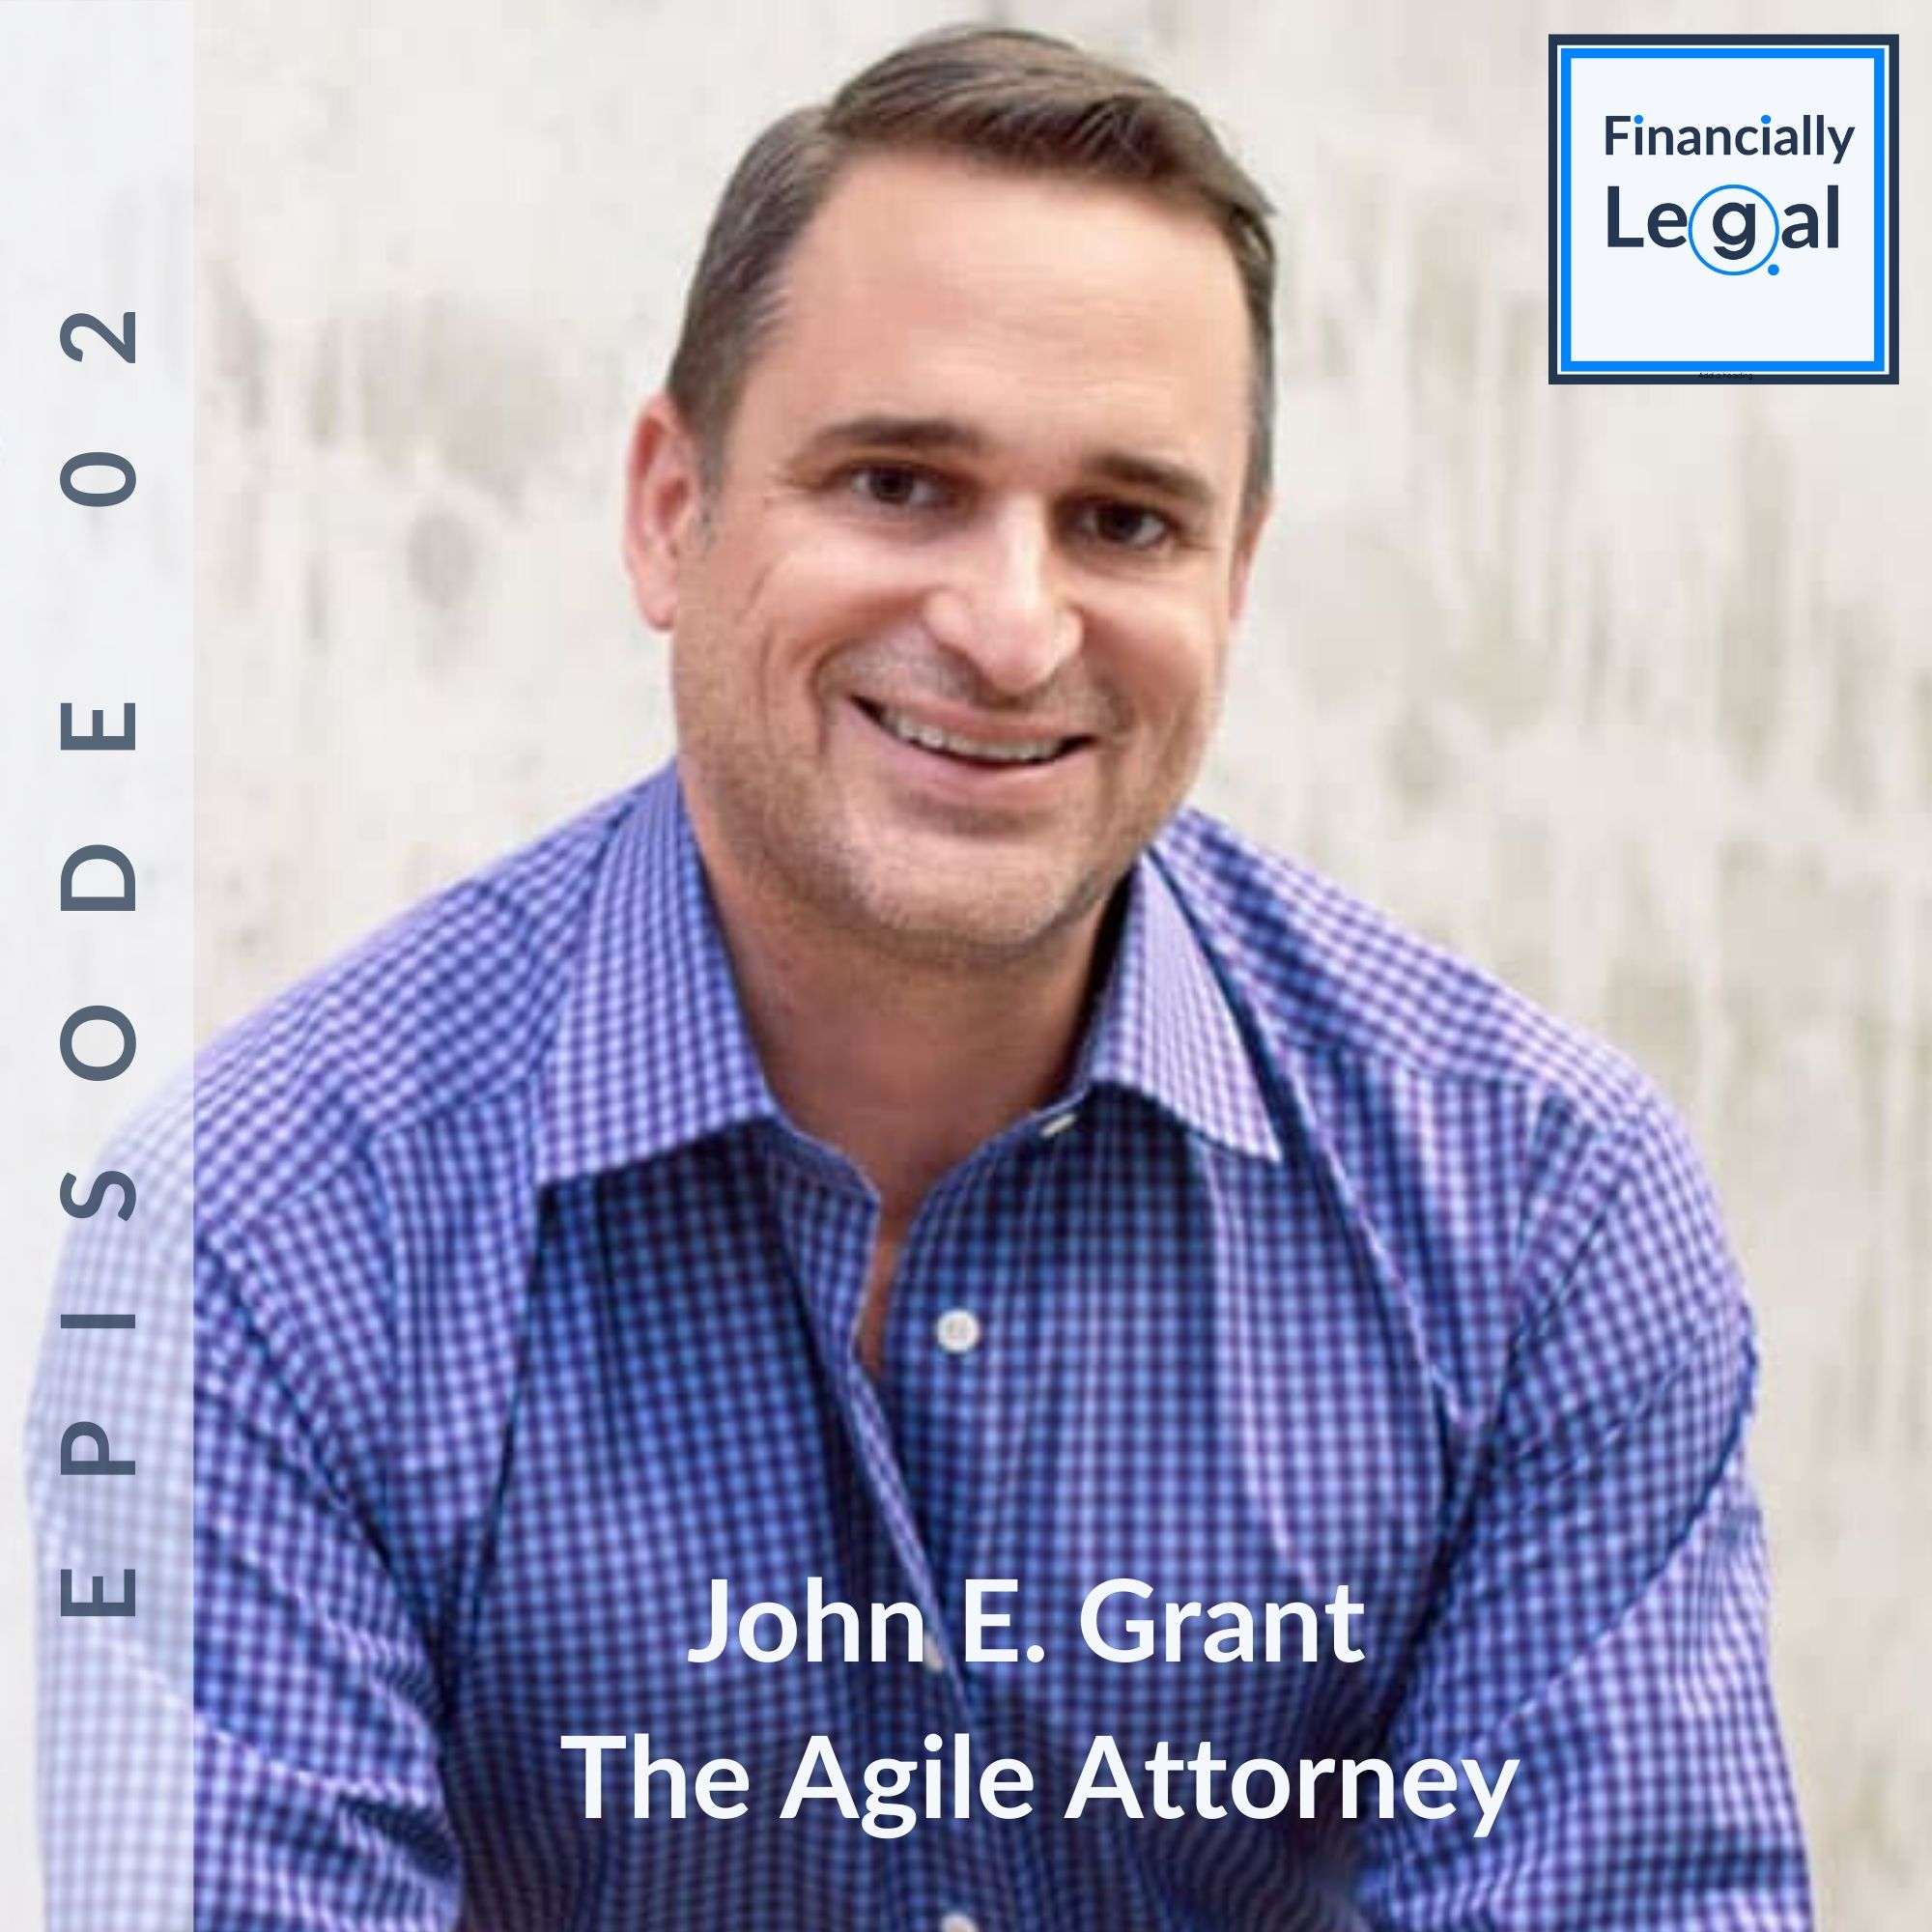 The Agile Attorney - Financially Legal